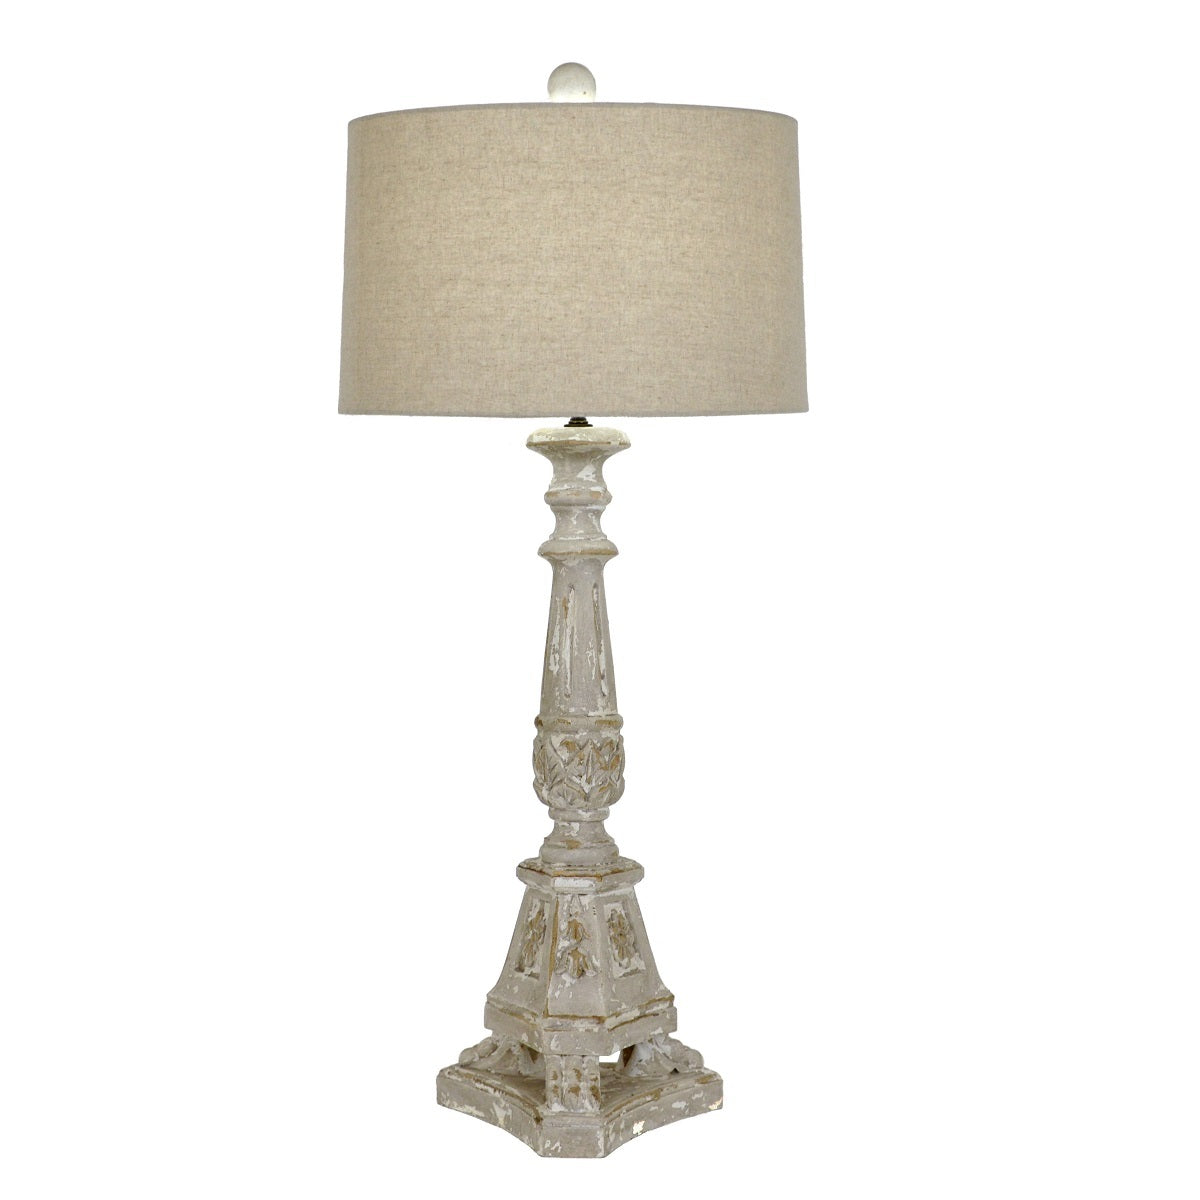 Fletcher Carved Wood Table Lamp - Lillian Home 